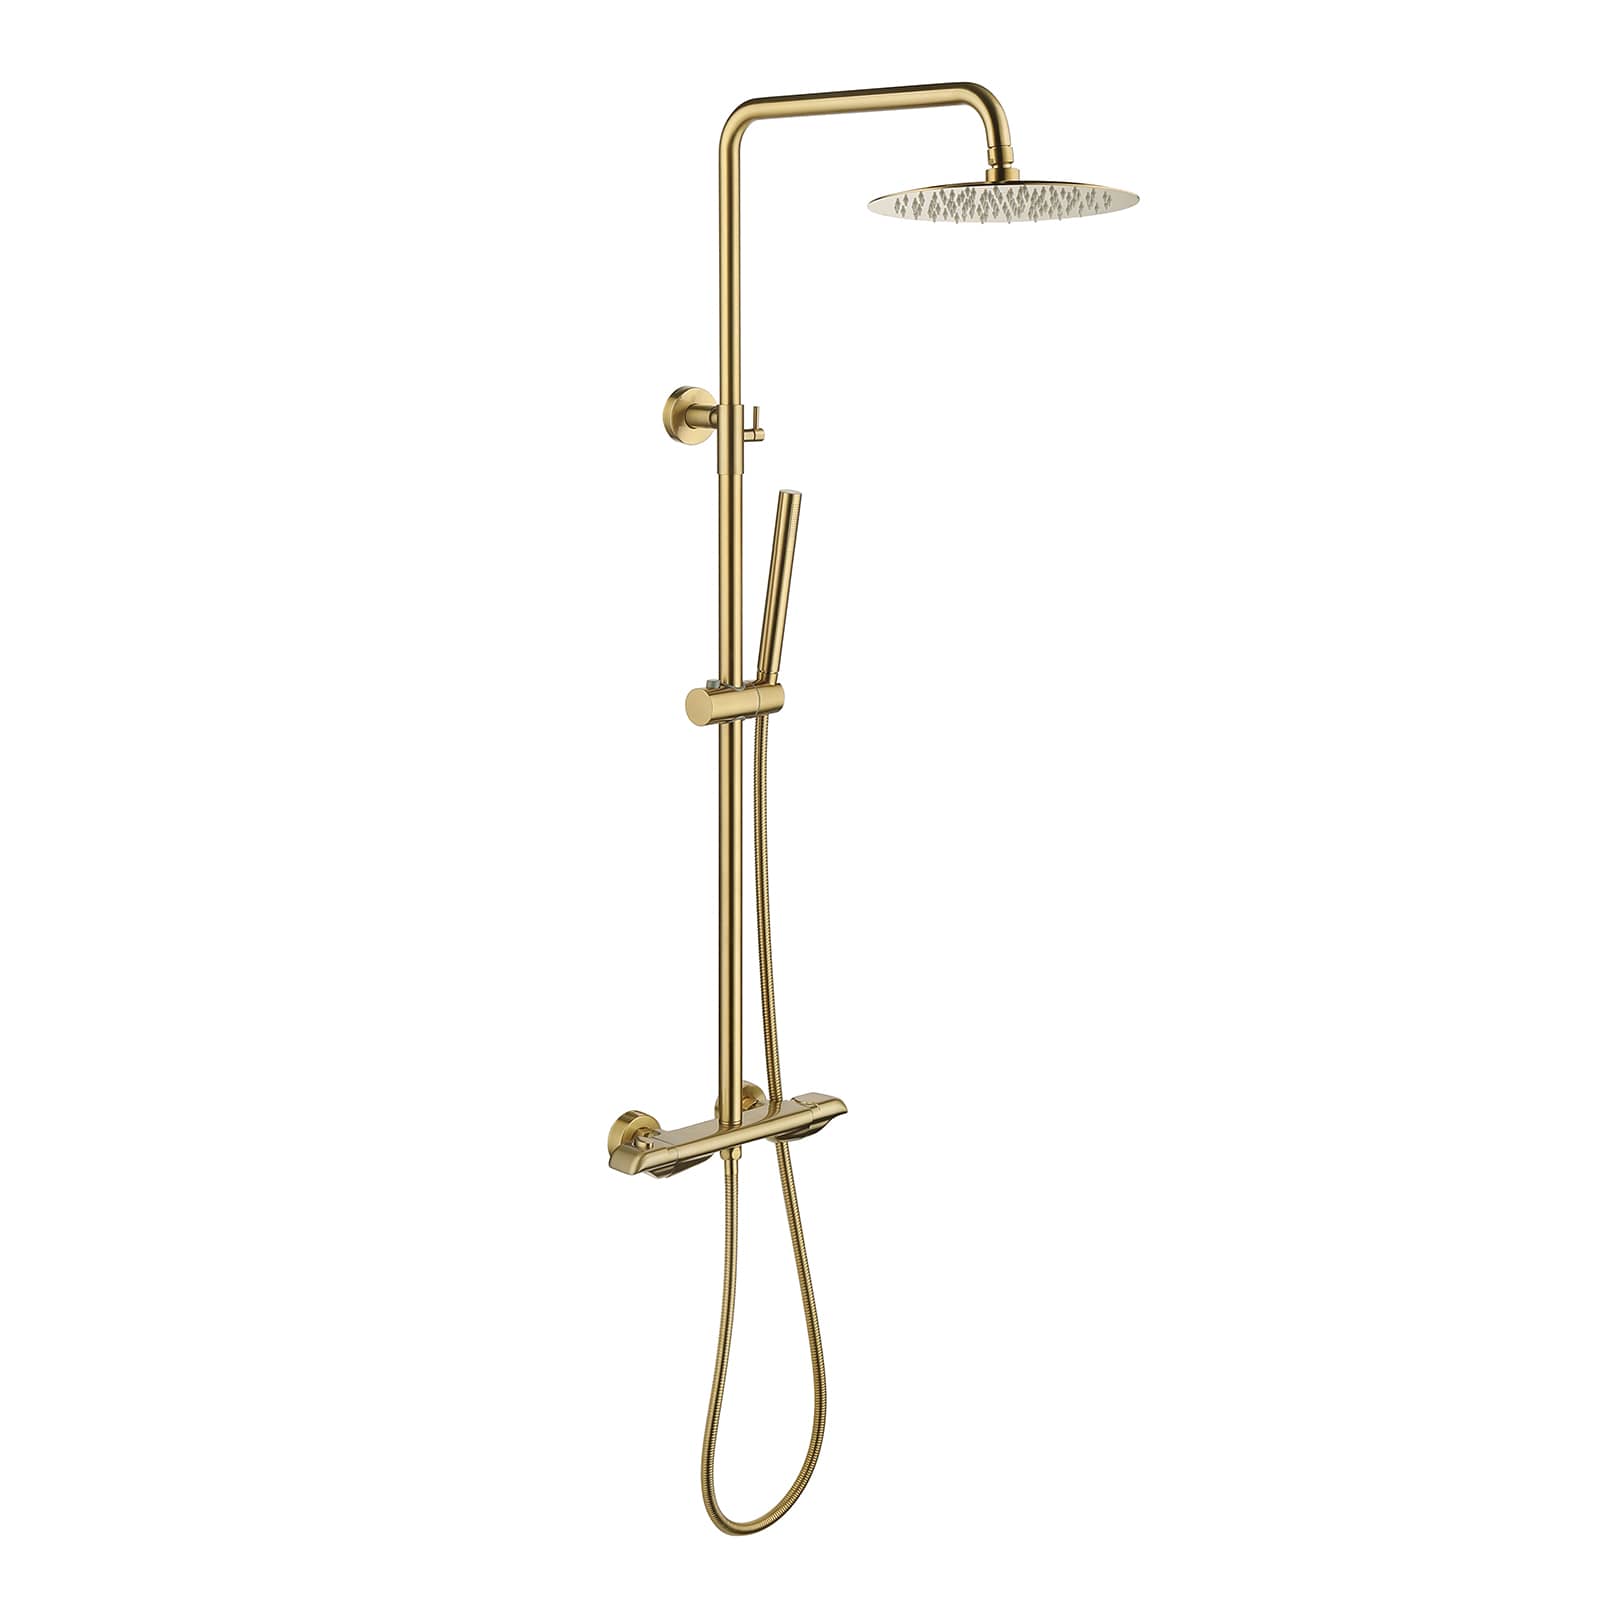 CASAINC Brushed Gold Shower System with Slide Bar and Rainfall Shower Head/Hand-Held Shower-Casainc Canada